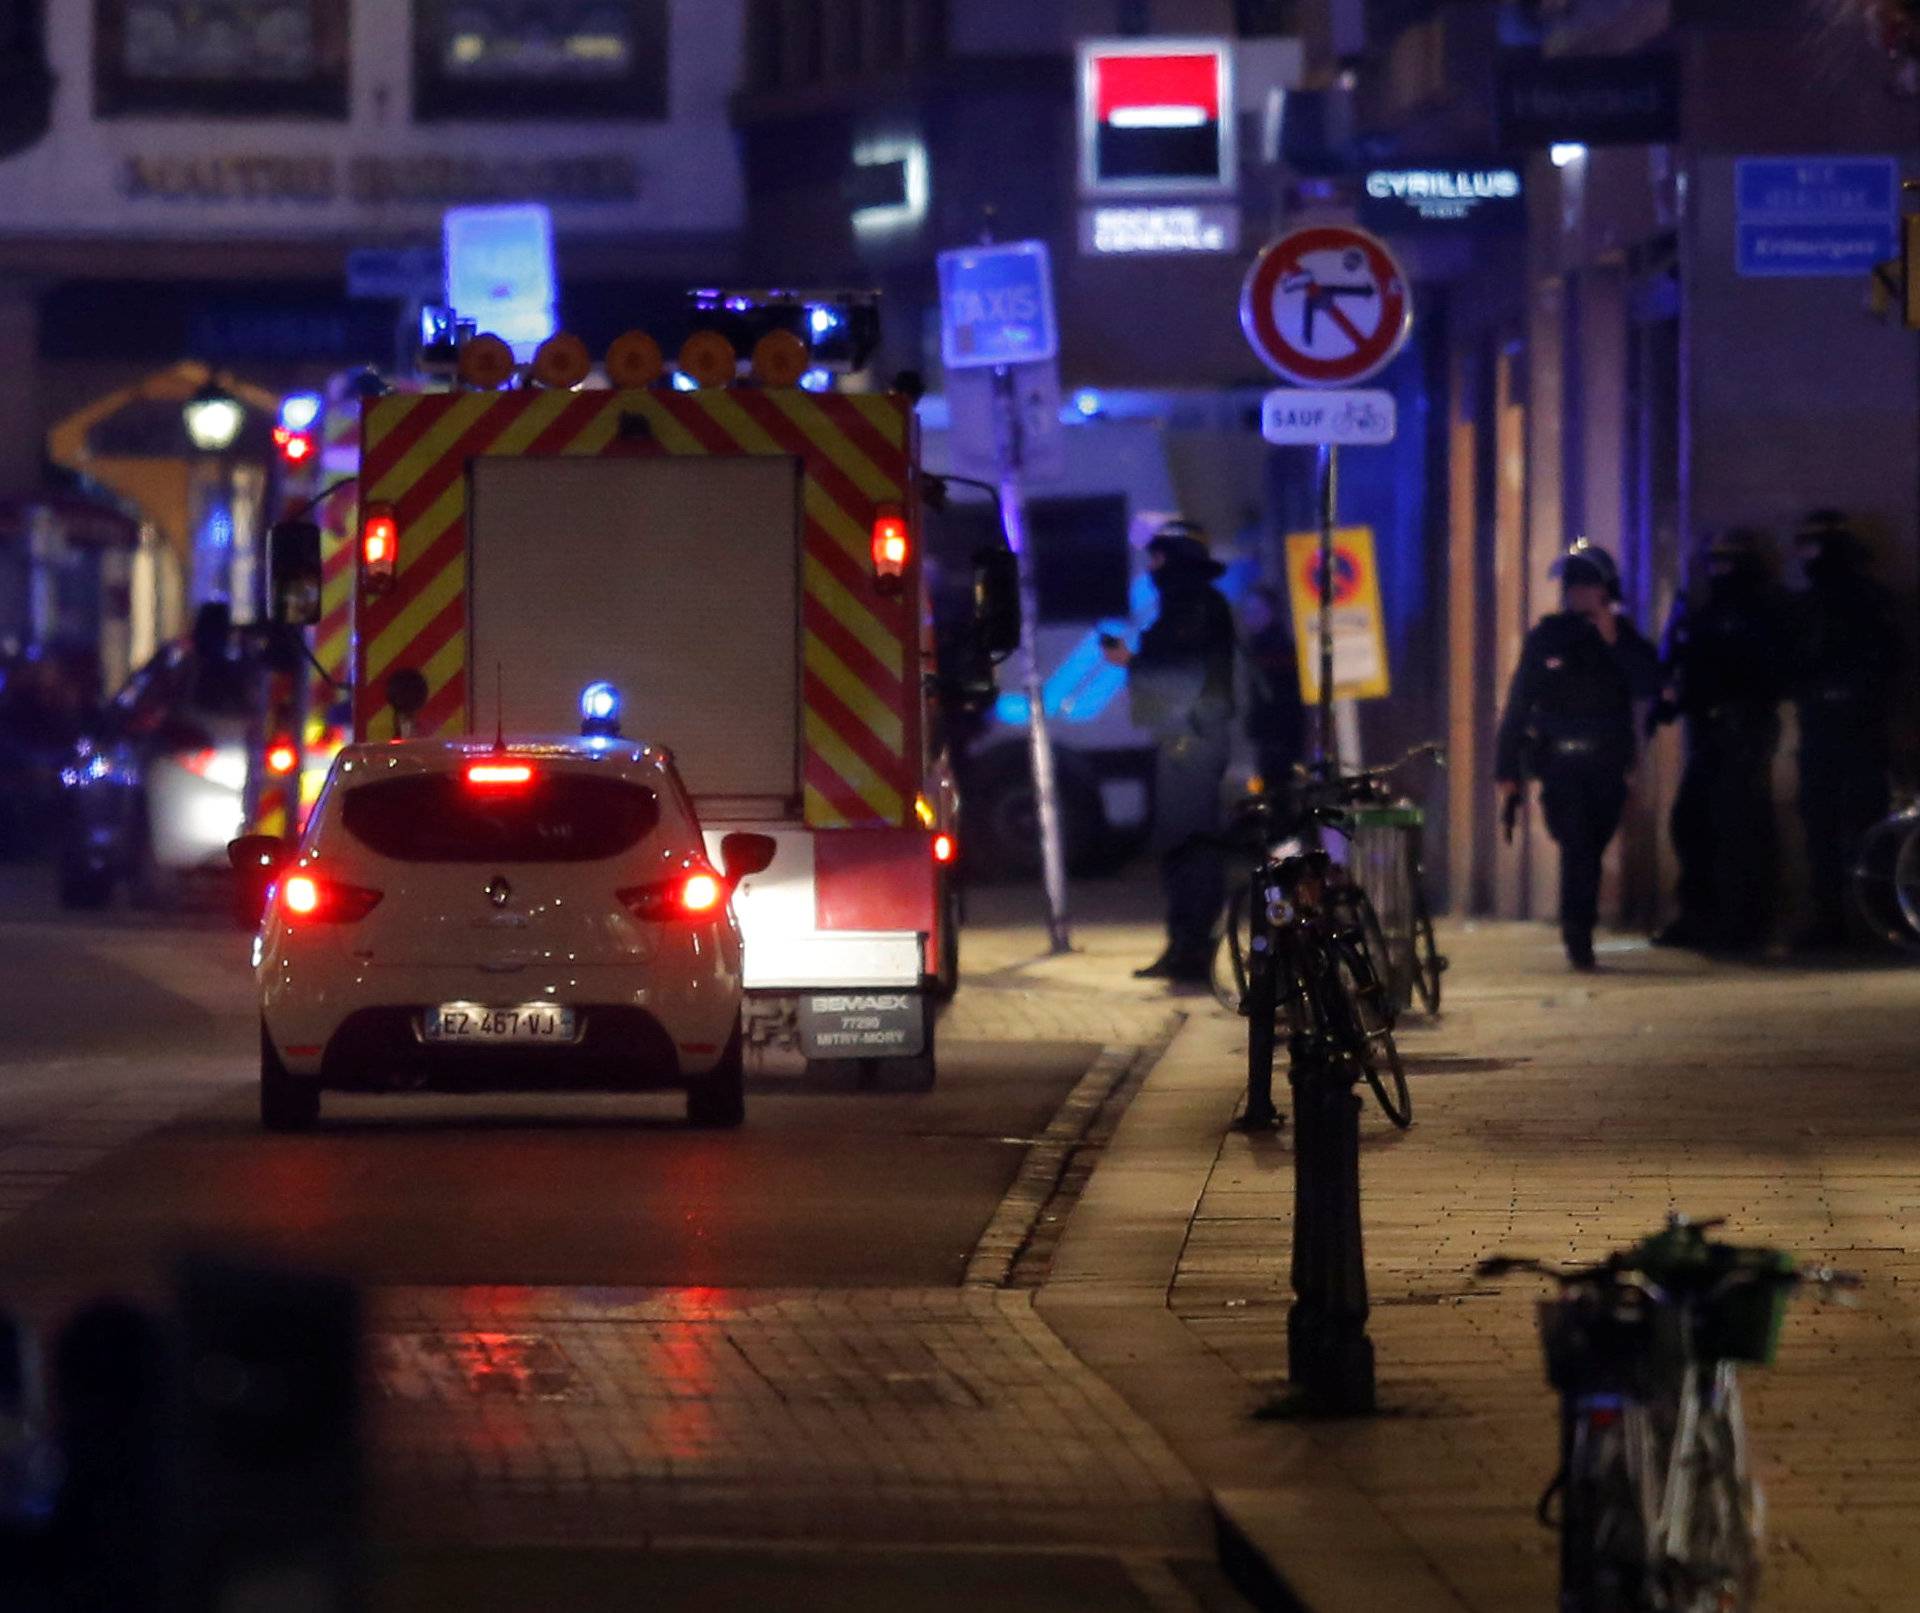 Rescue teams work at the scene of shooting in Strasbourg